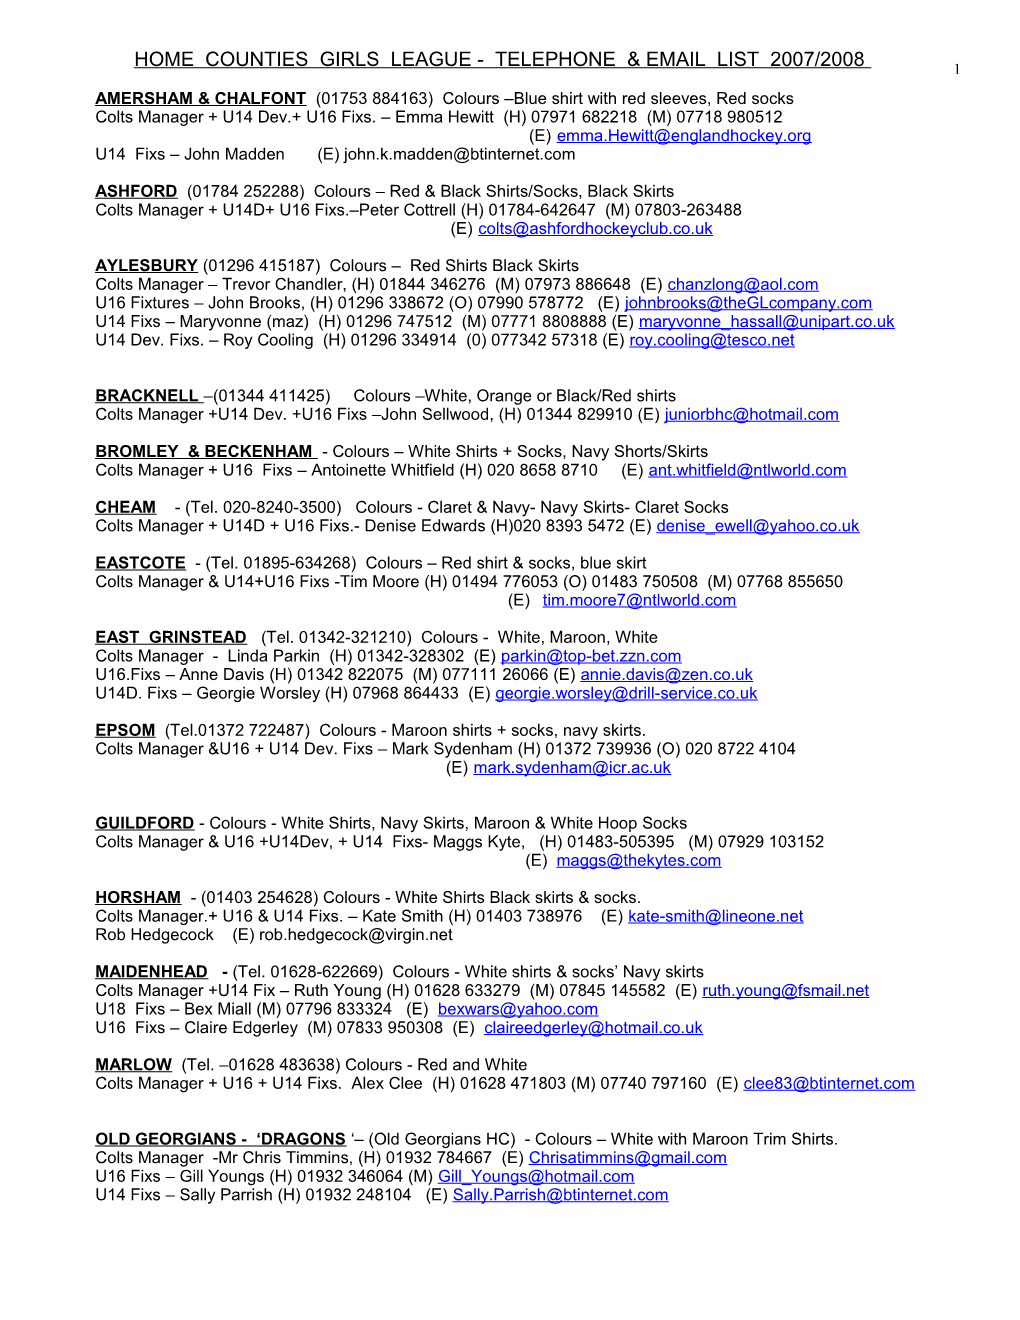 Home Counties Girls League - Telephone & Email List 2007/2008